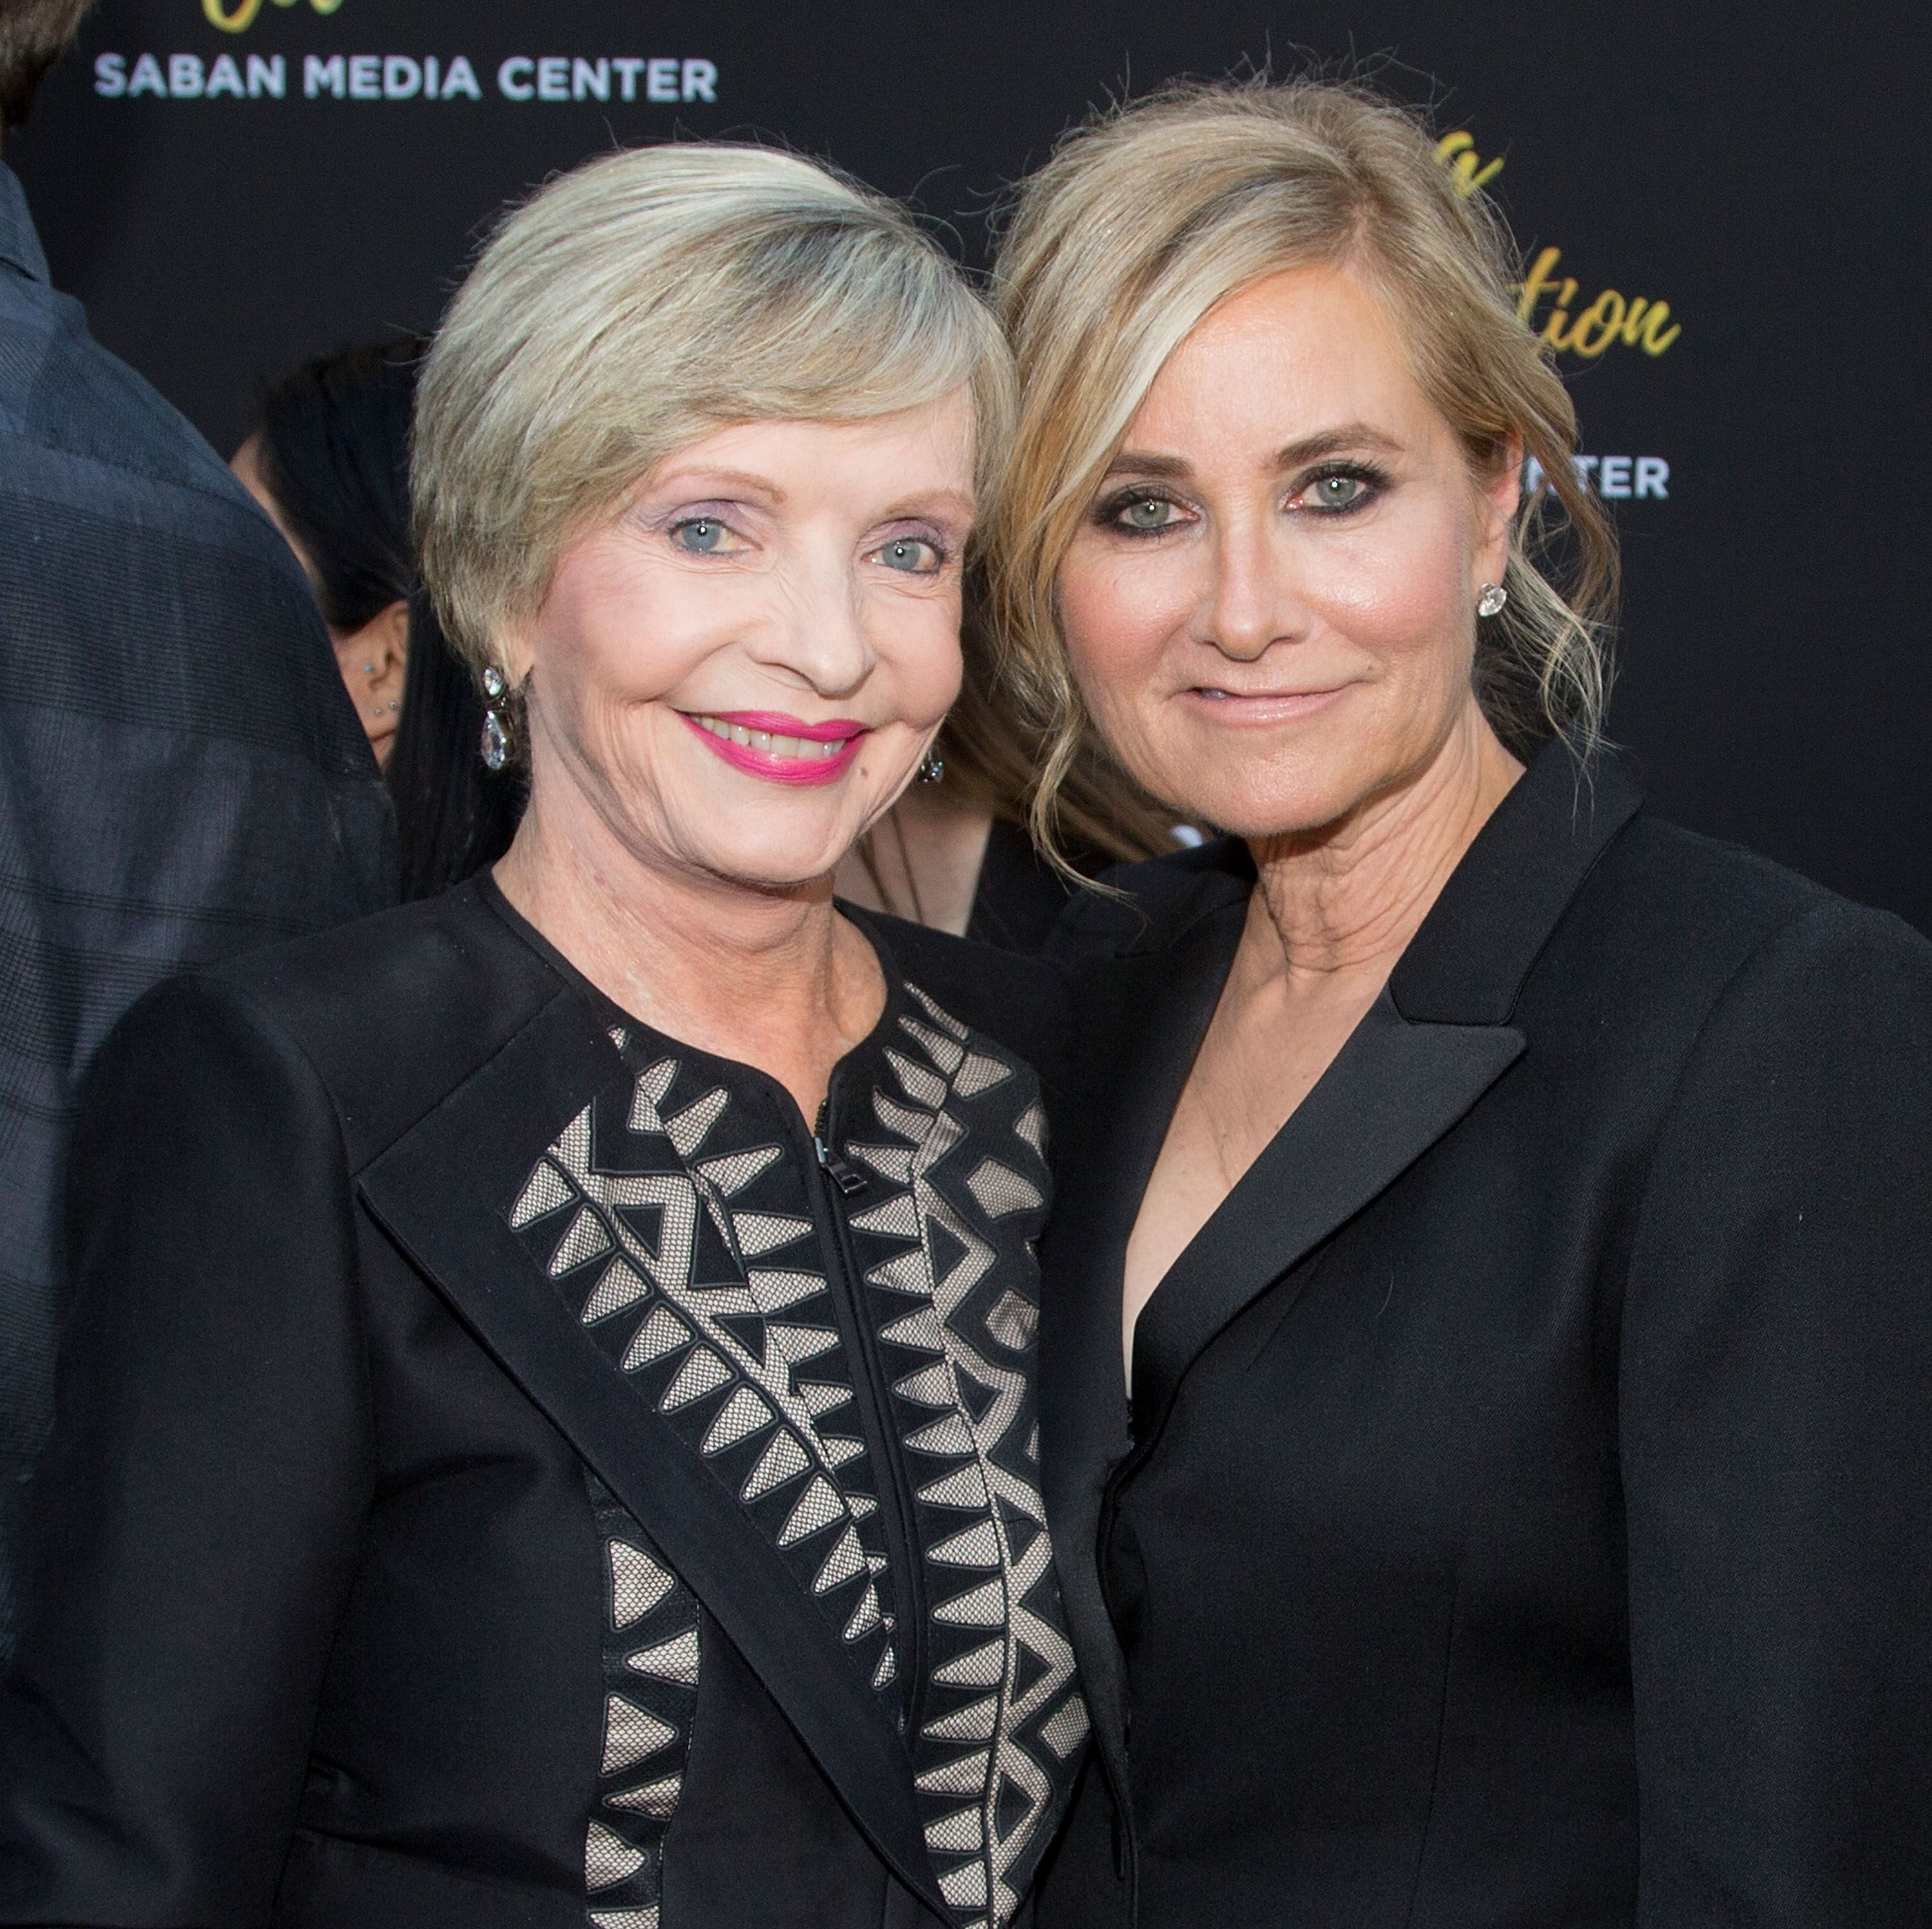 Maureen McCormick and Florence Henderson Reunite for an Awesome